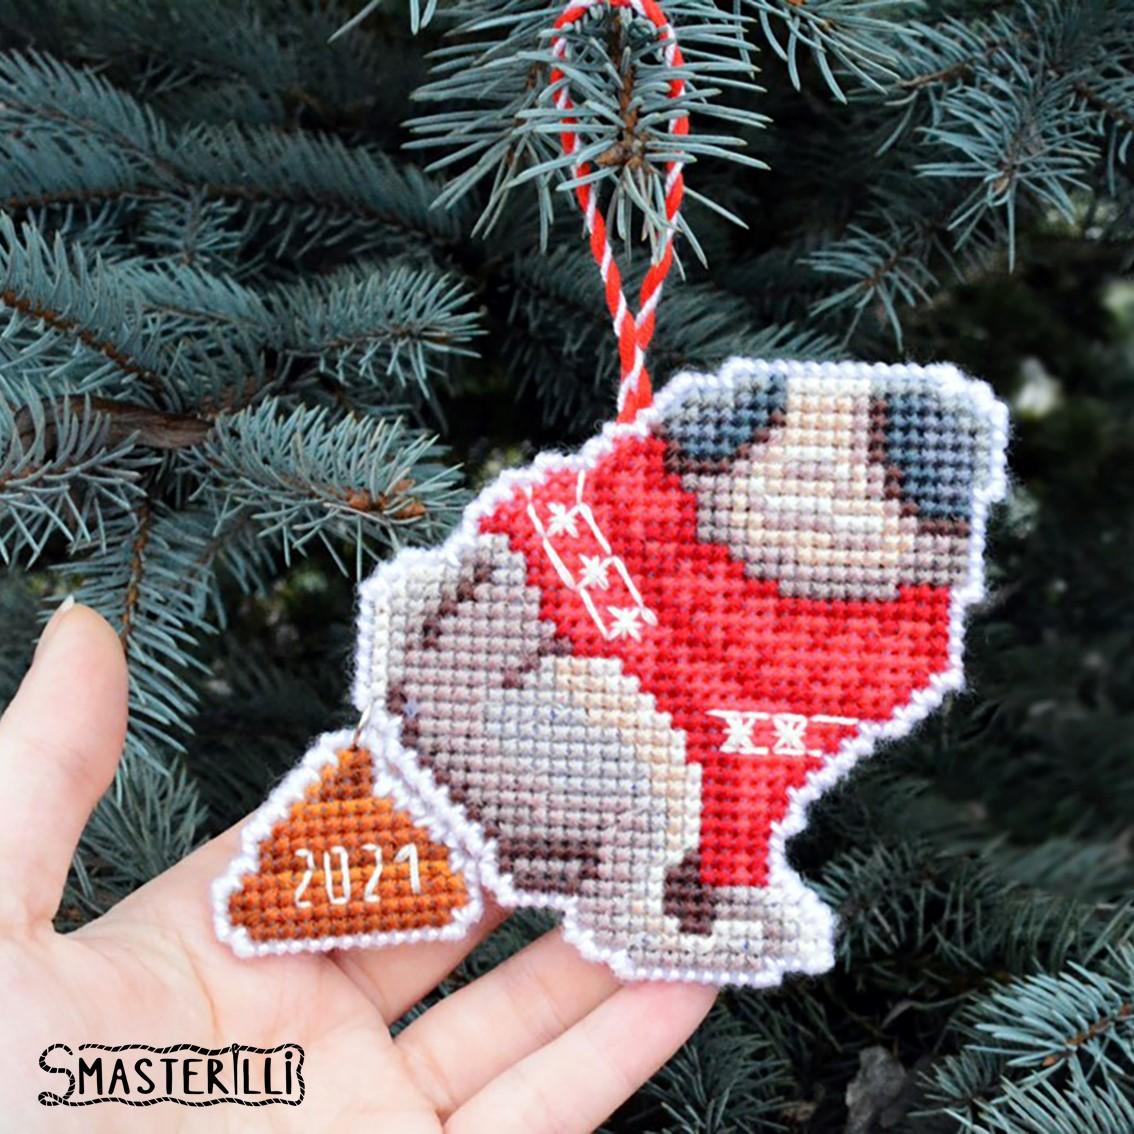 Christmas pooping pug cross stitch pattern for plastic canvas. Pattern and detailed tutorial with photos and instructions for creation christmas gift by Smasterilli. Christmas handmade crafts. Plastic Canvas Project #smasterilli #crossstitch #crossstitchpattern #wintercrossstitch #christmascrossstitch #plasticcanvas